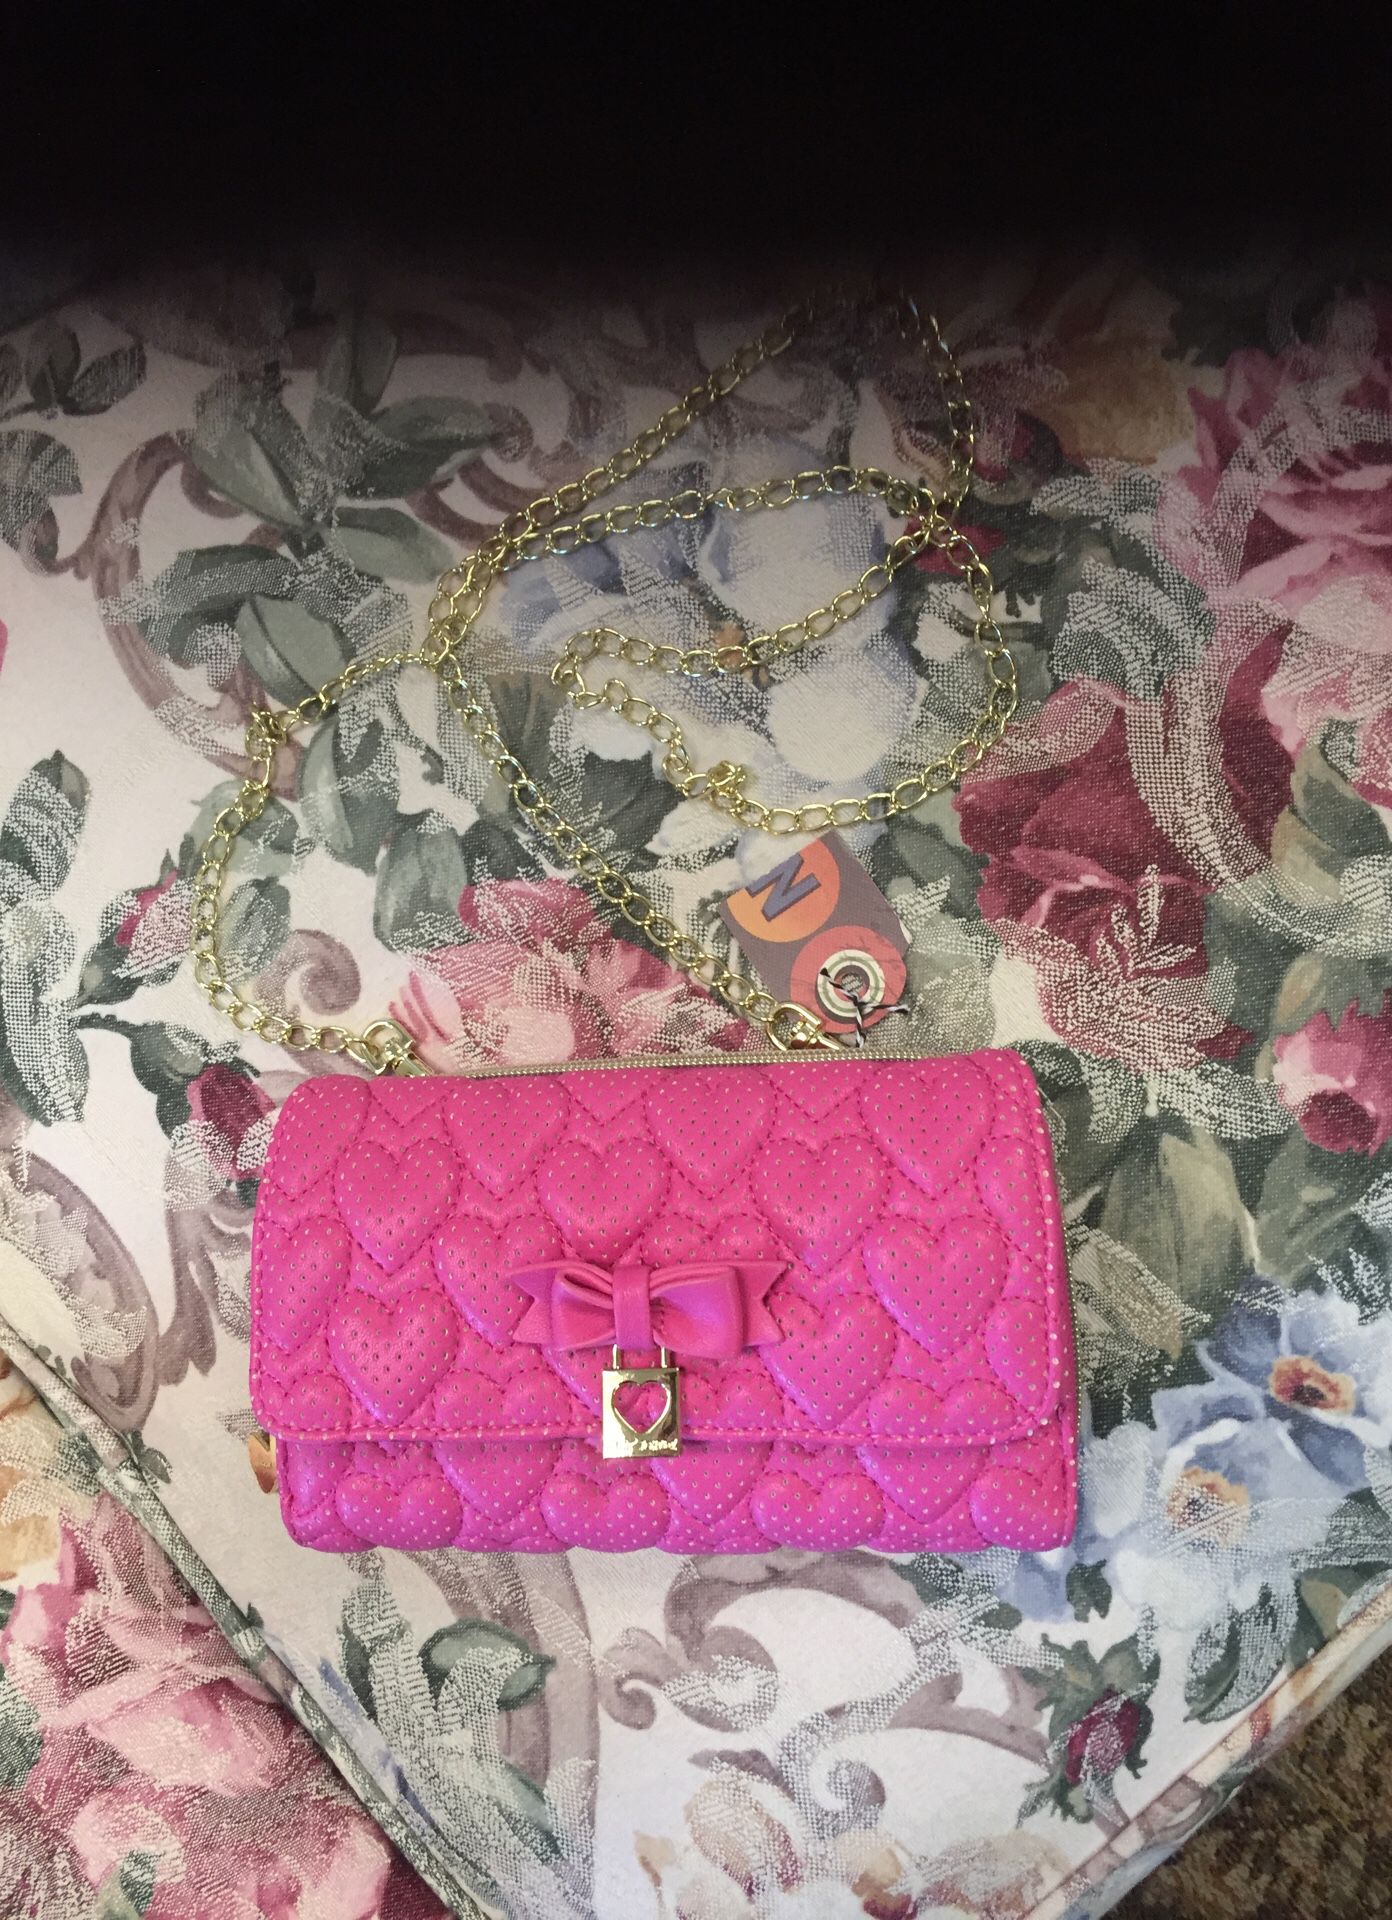 Betsy Johnson pink wallet / purse with gold chain strap